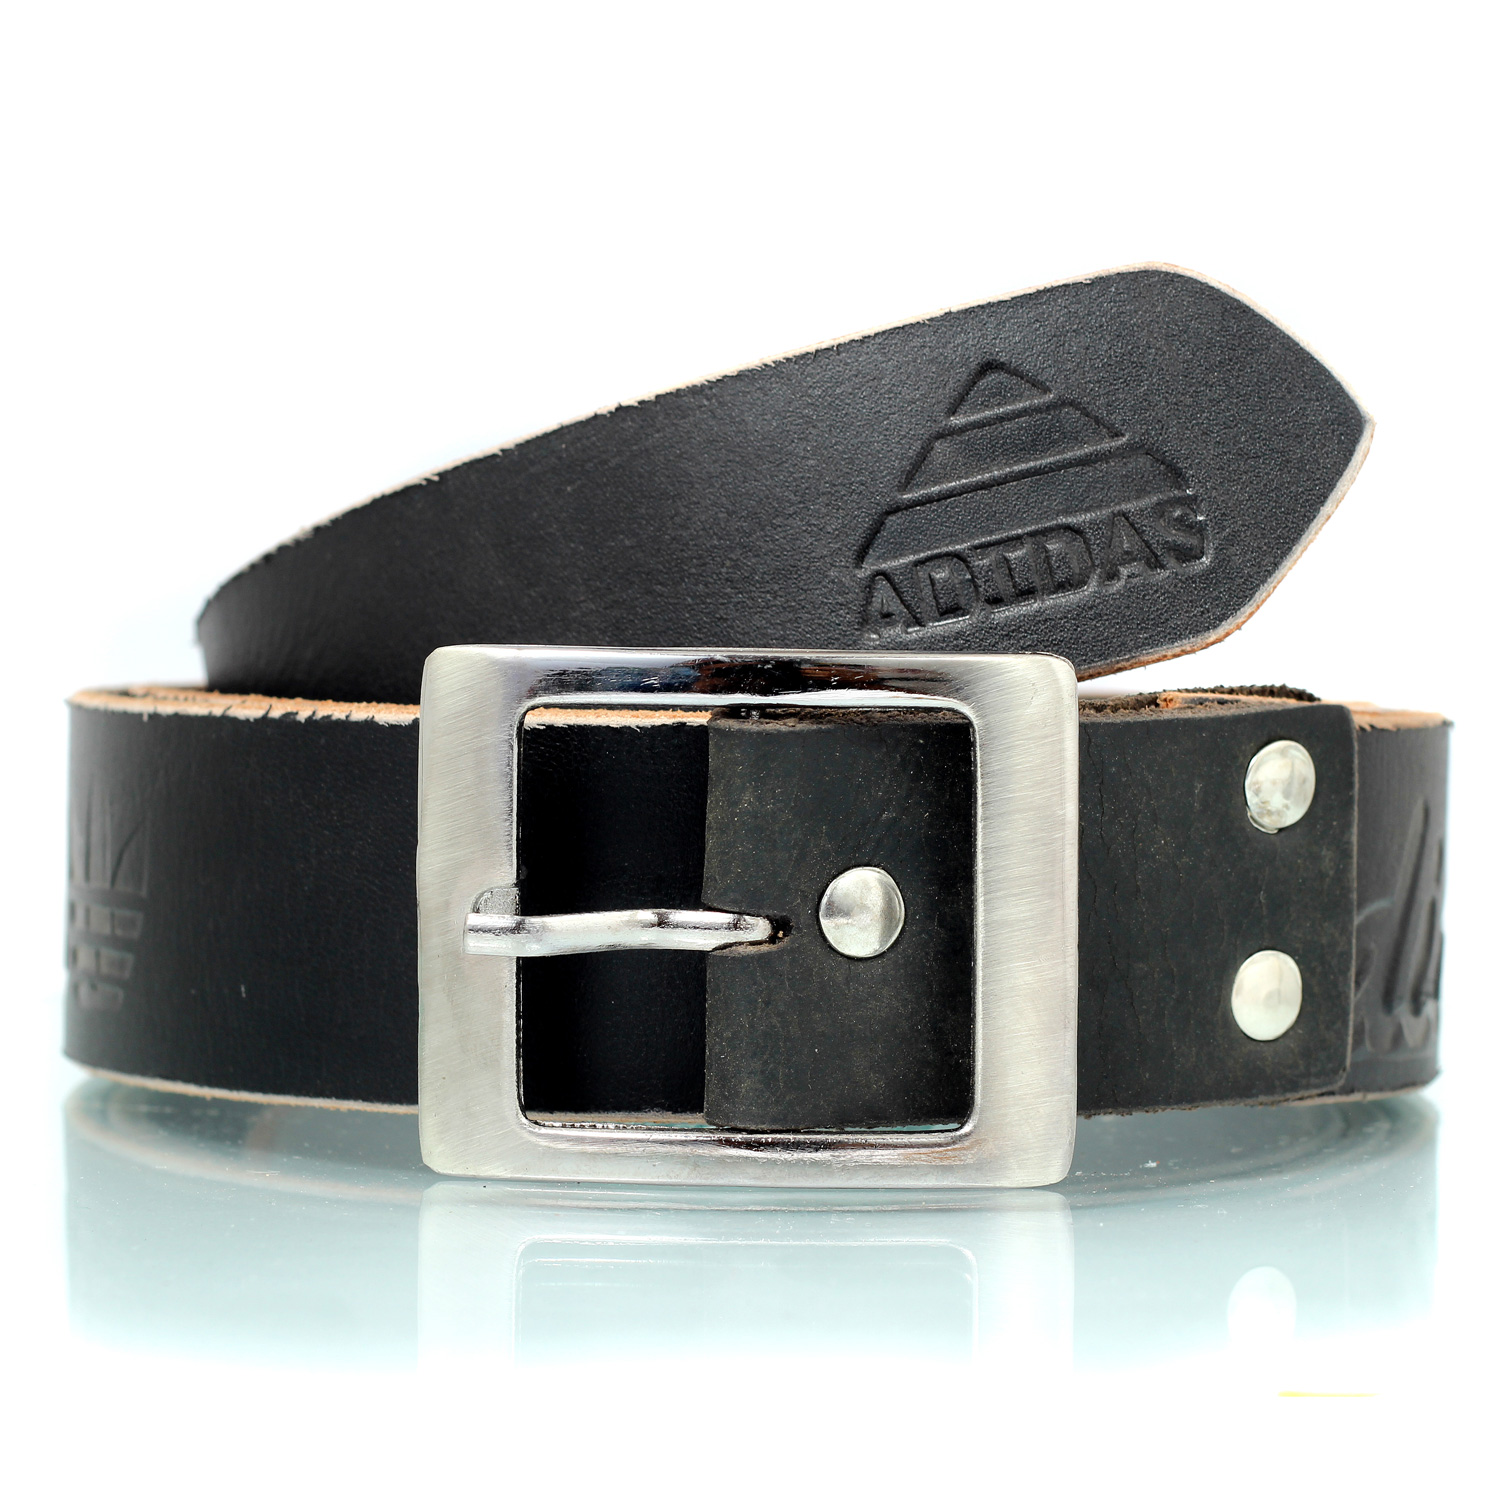 Rough and tough pure spunky leather look belt with metallic pin buckle